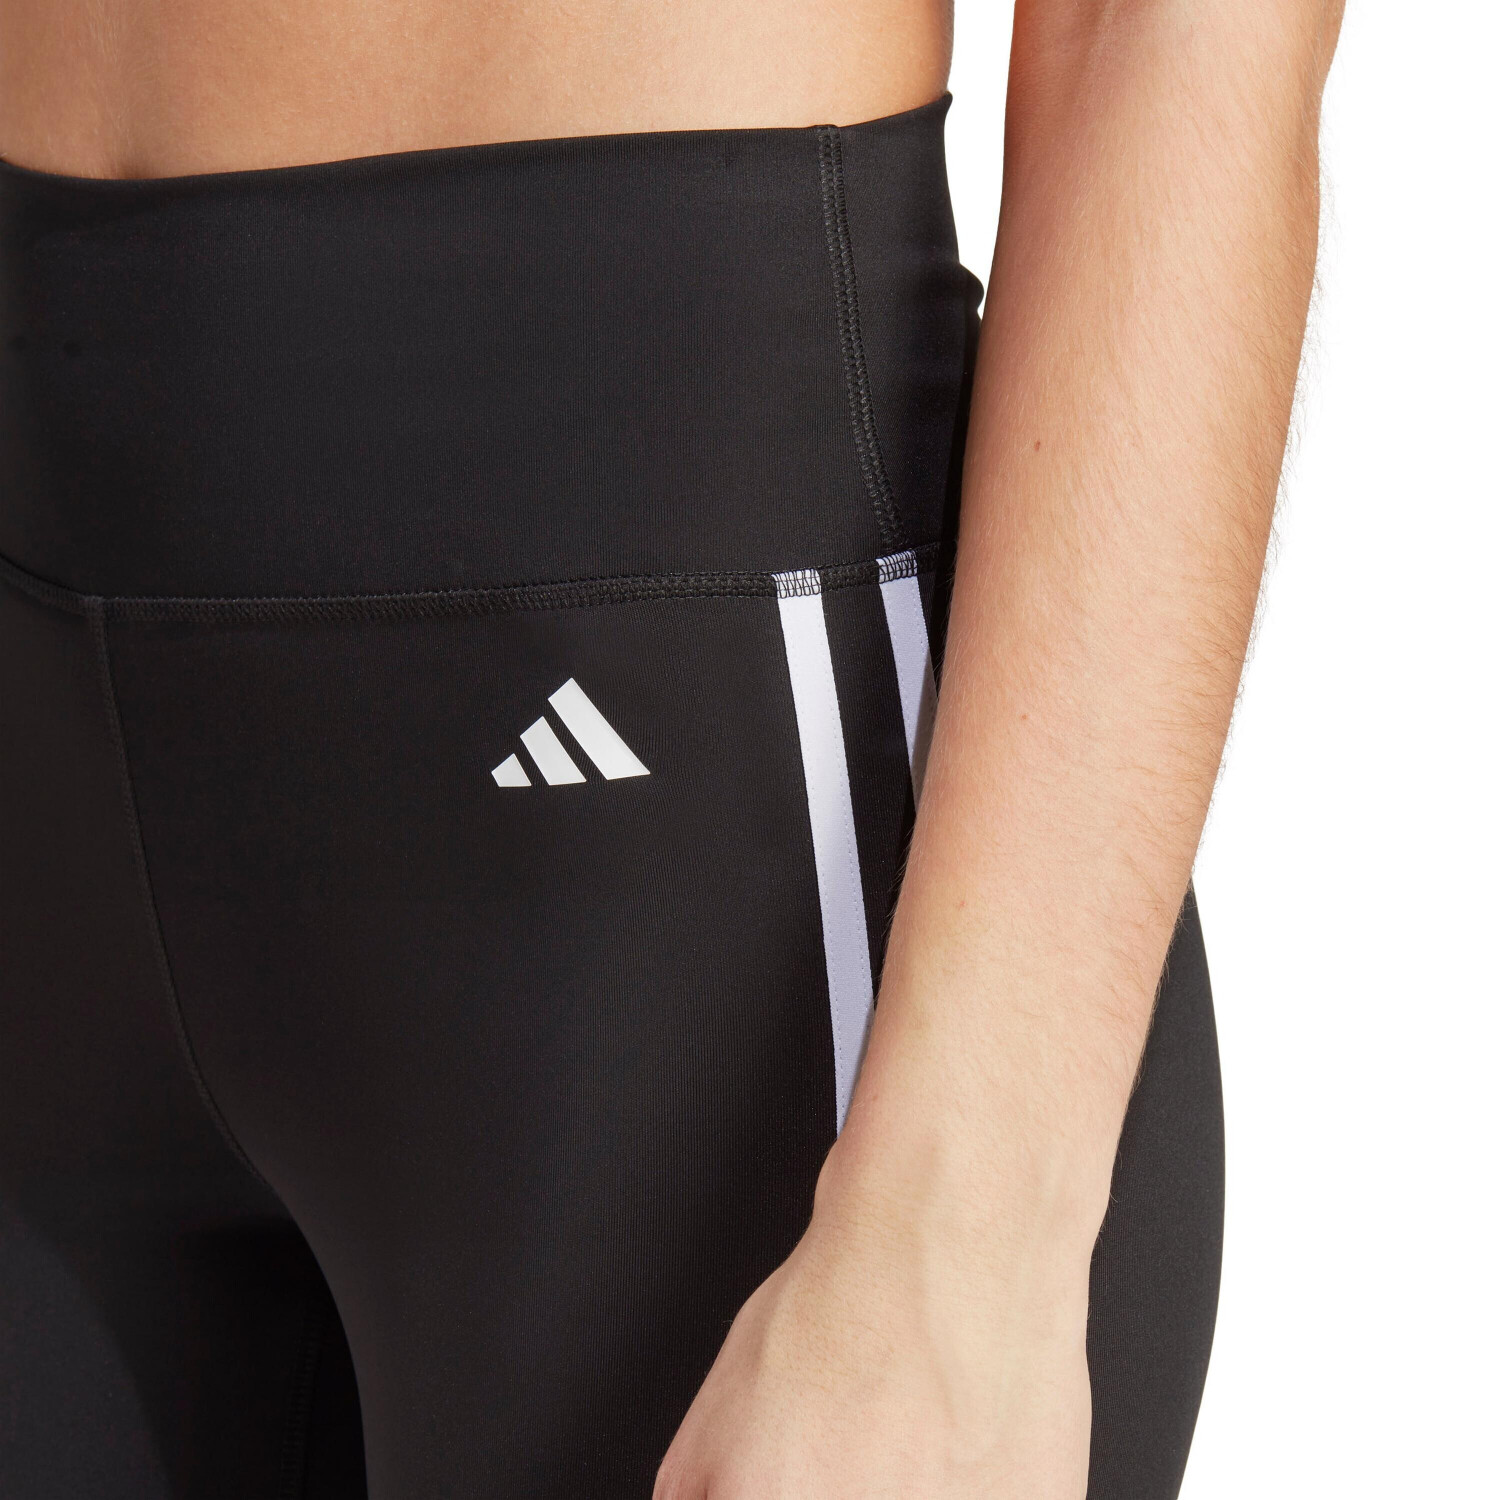 Adidas Climalite Running Tights Women's Black S Compression 3/4